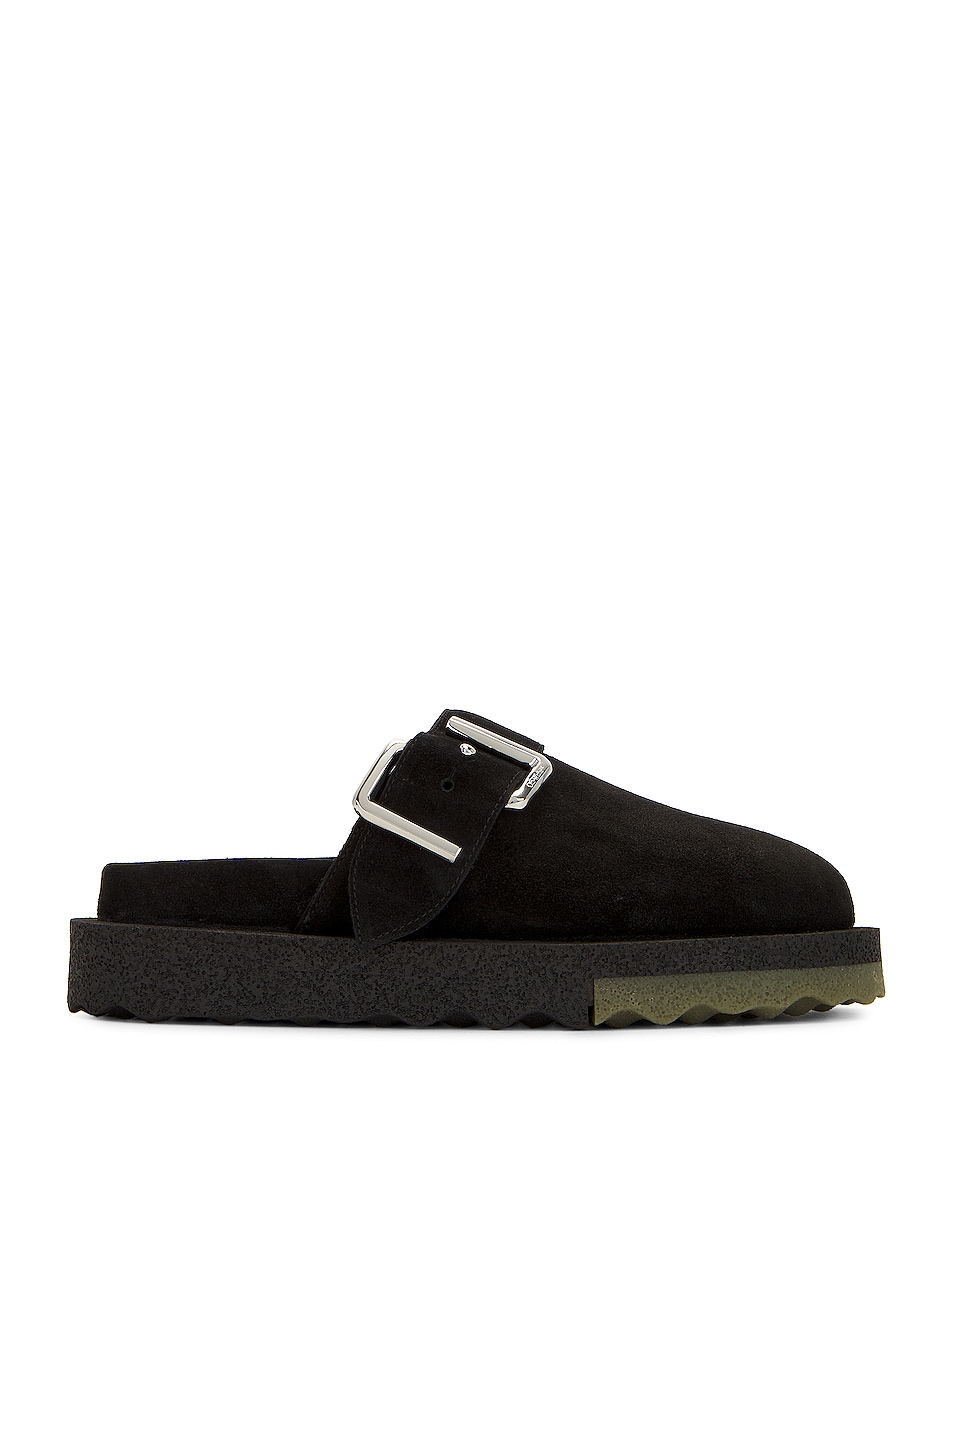 Image 1 of OFF-WHITE Suede Clogs in Black & Army Green